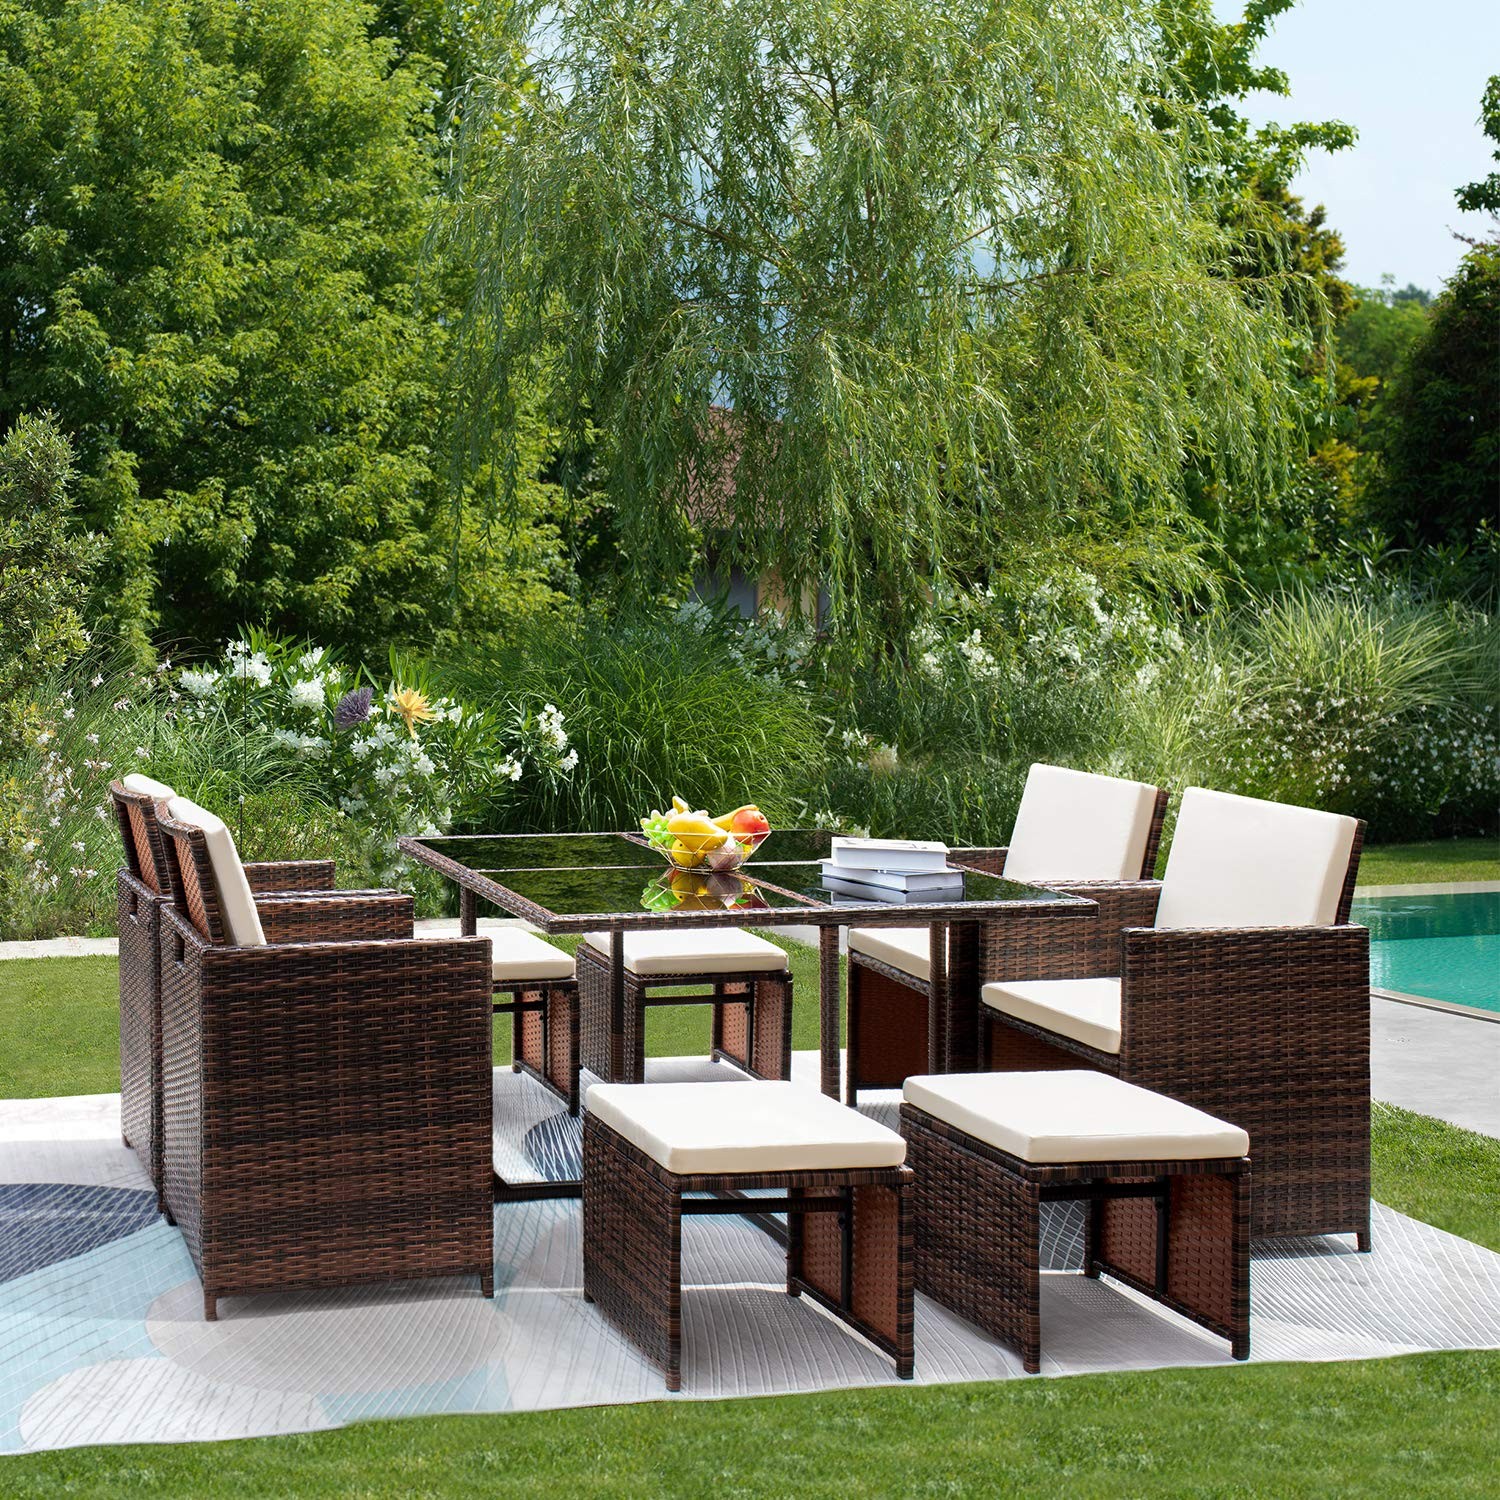 Vineego 9 Pieces Patio Dining Sets Outdoor Furniture Patio Wicker Rattan Chairs and Tempered Glass Table Sectional Set Conversation Set Cushioned with Ottoman (Brown) - image 1 of 2